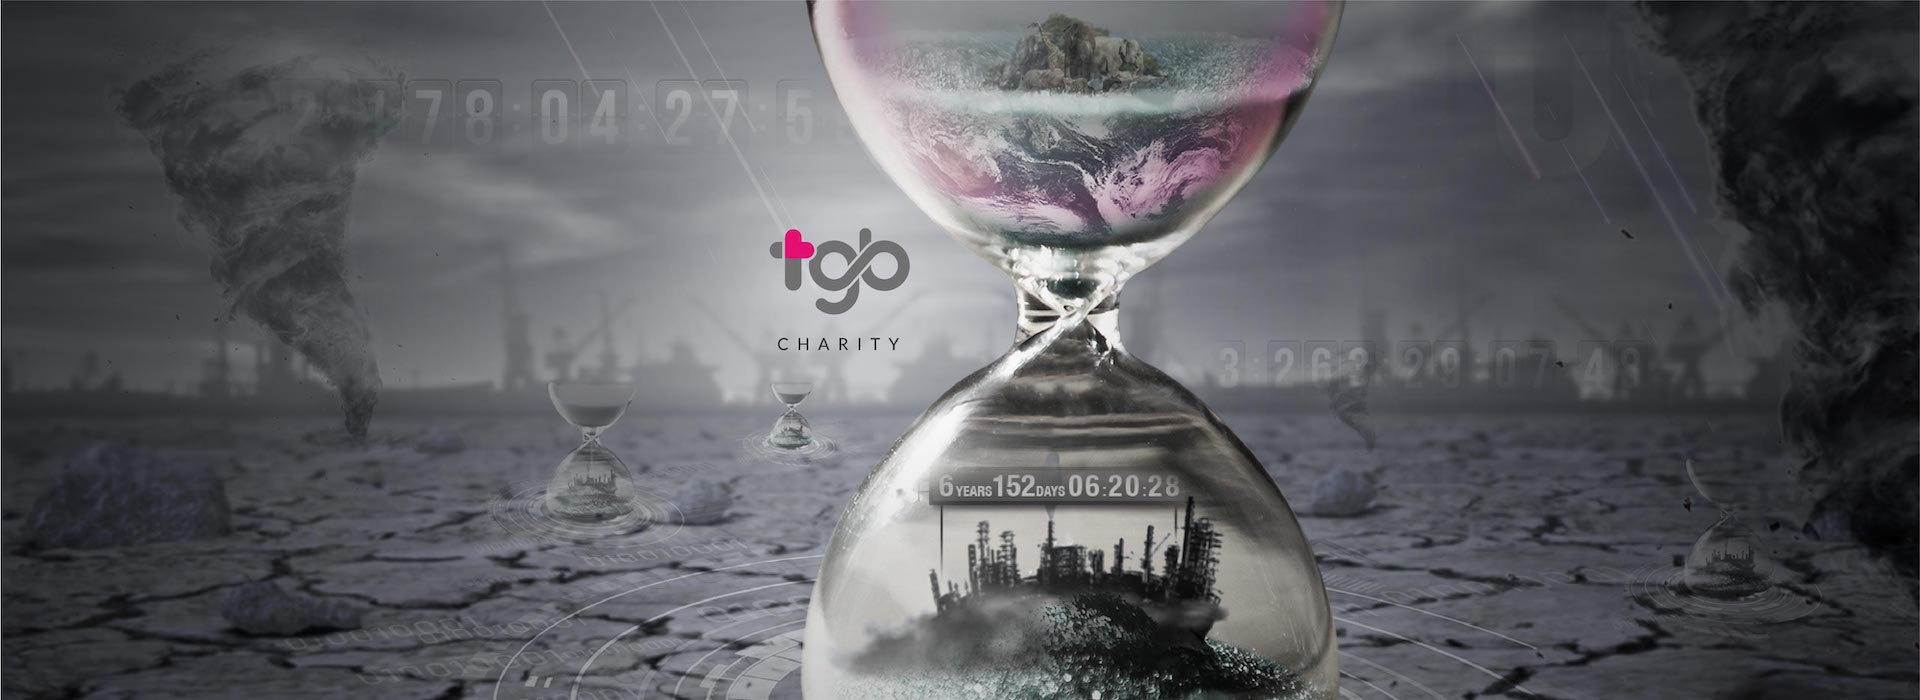 TGB Charity - The Climate Clock warns us just how close the Earth's deadline is.